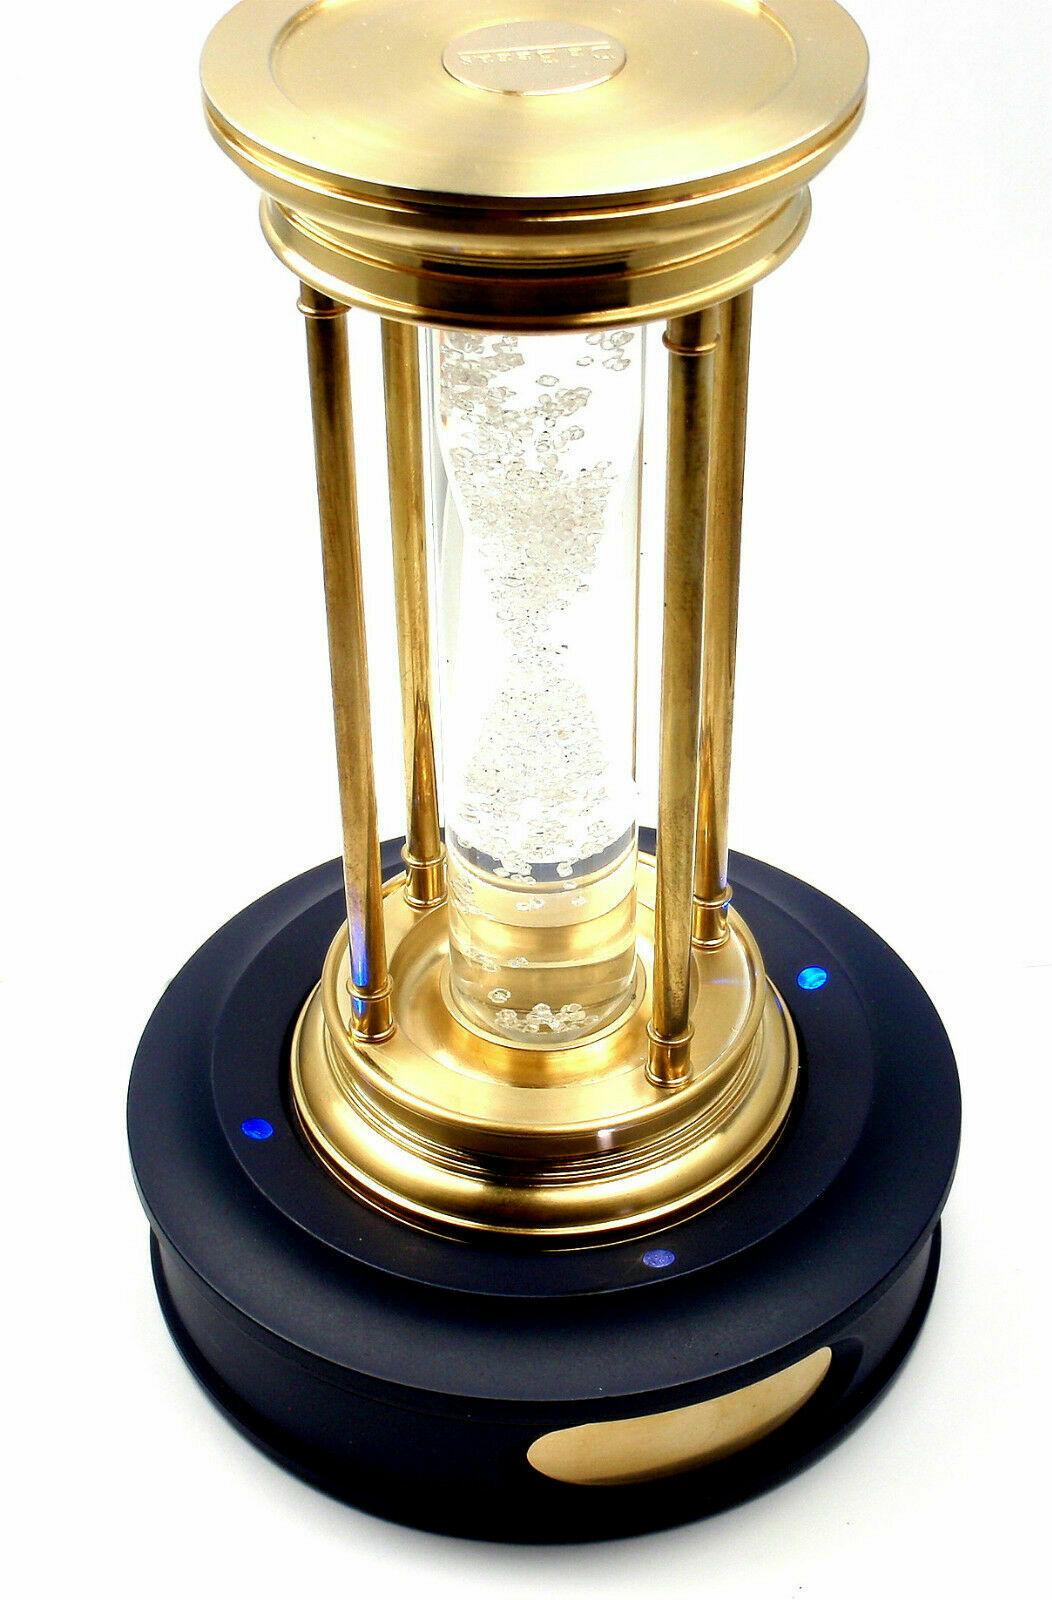 Very Rare! Limited Edition Millennium 2000 Diamond Brass Hourglass Timer by De Beers.
This item comes with lighted pedestal and box.
This hourglass was just sold on June 3, 2015 at Christies for $41,285.
Containing a cascade of over 2000 natural